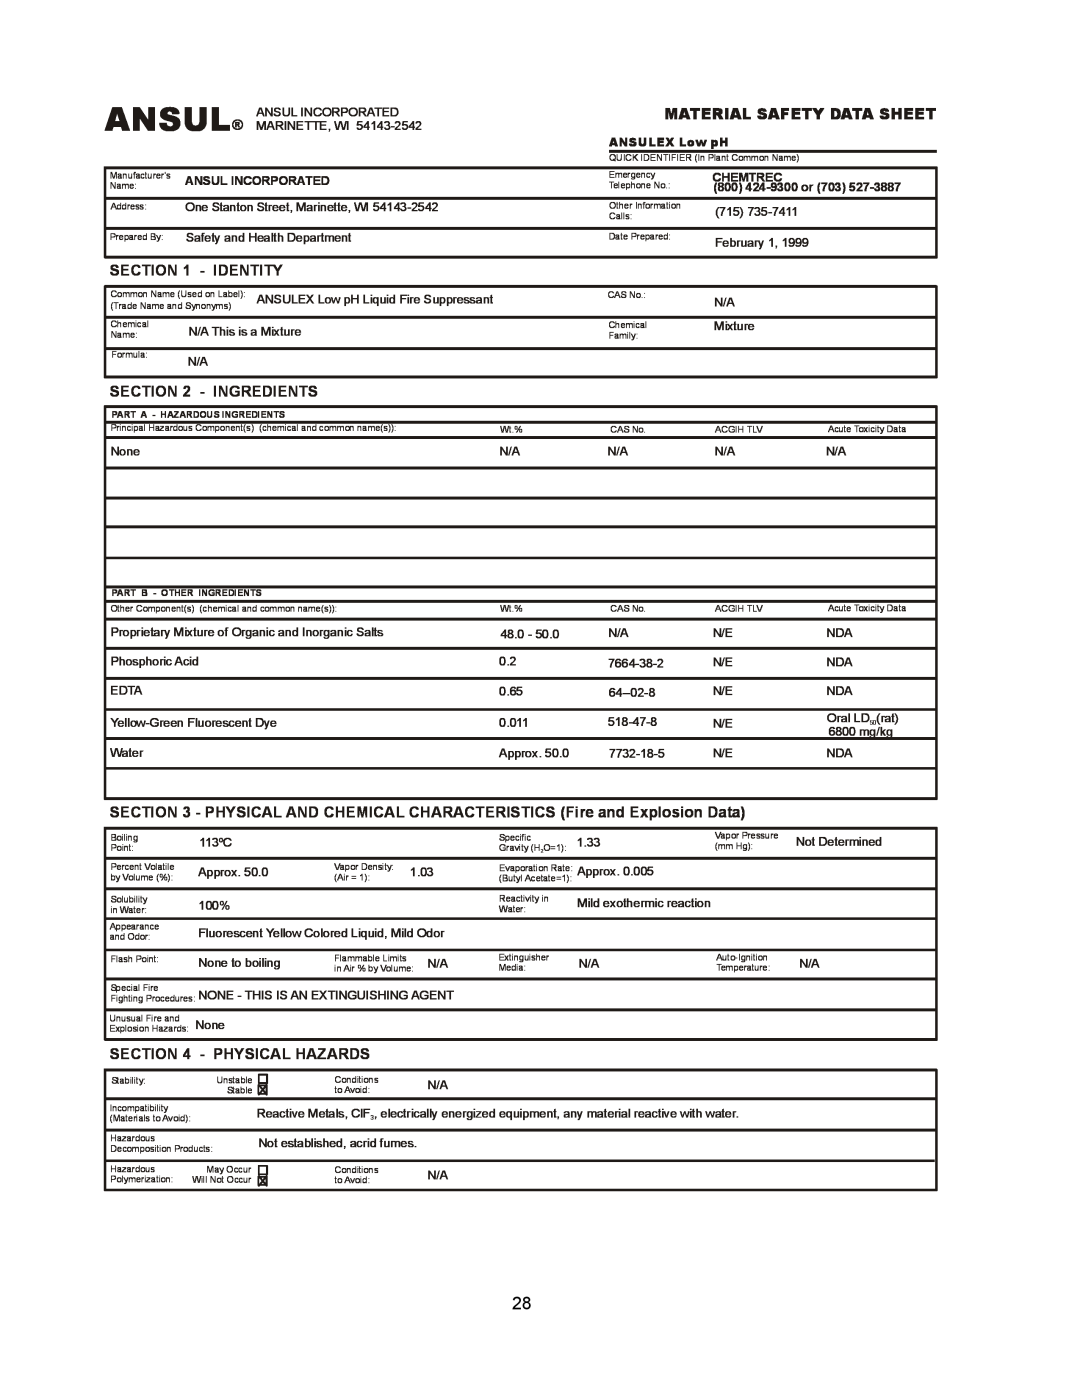 Wells WV-FGRW Ansul, Identity, Ingredients, Physical Hazards, Material Safety Data Sheet, ANSULEX Low pH, Chemtrec 